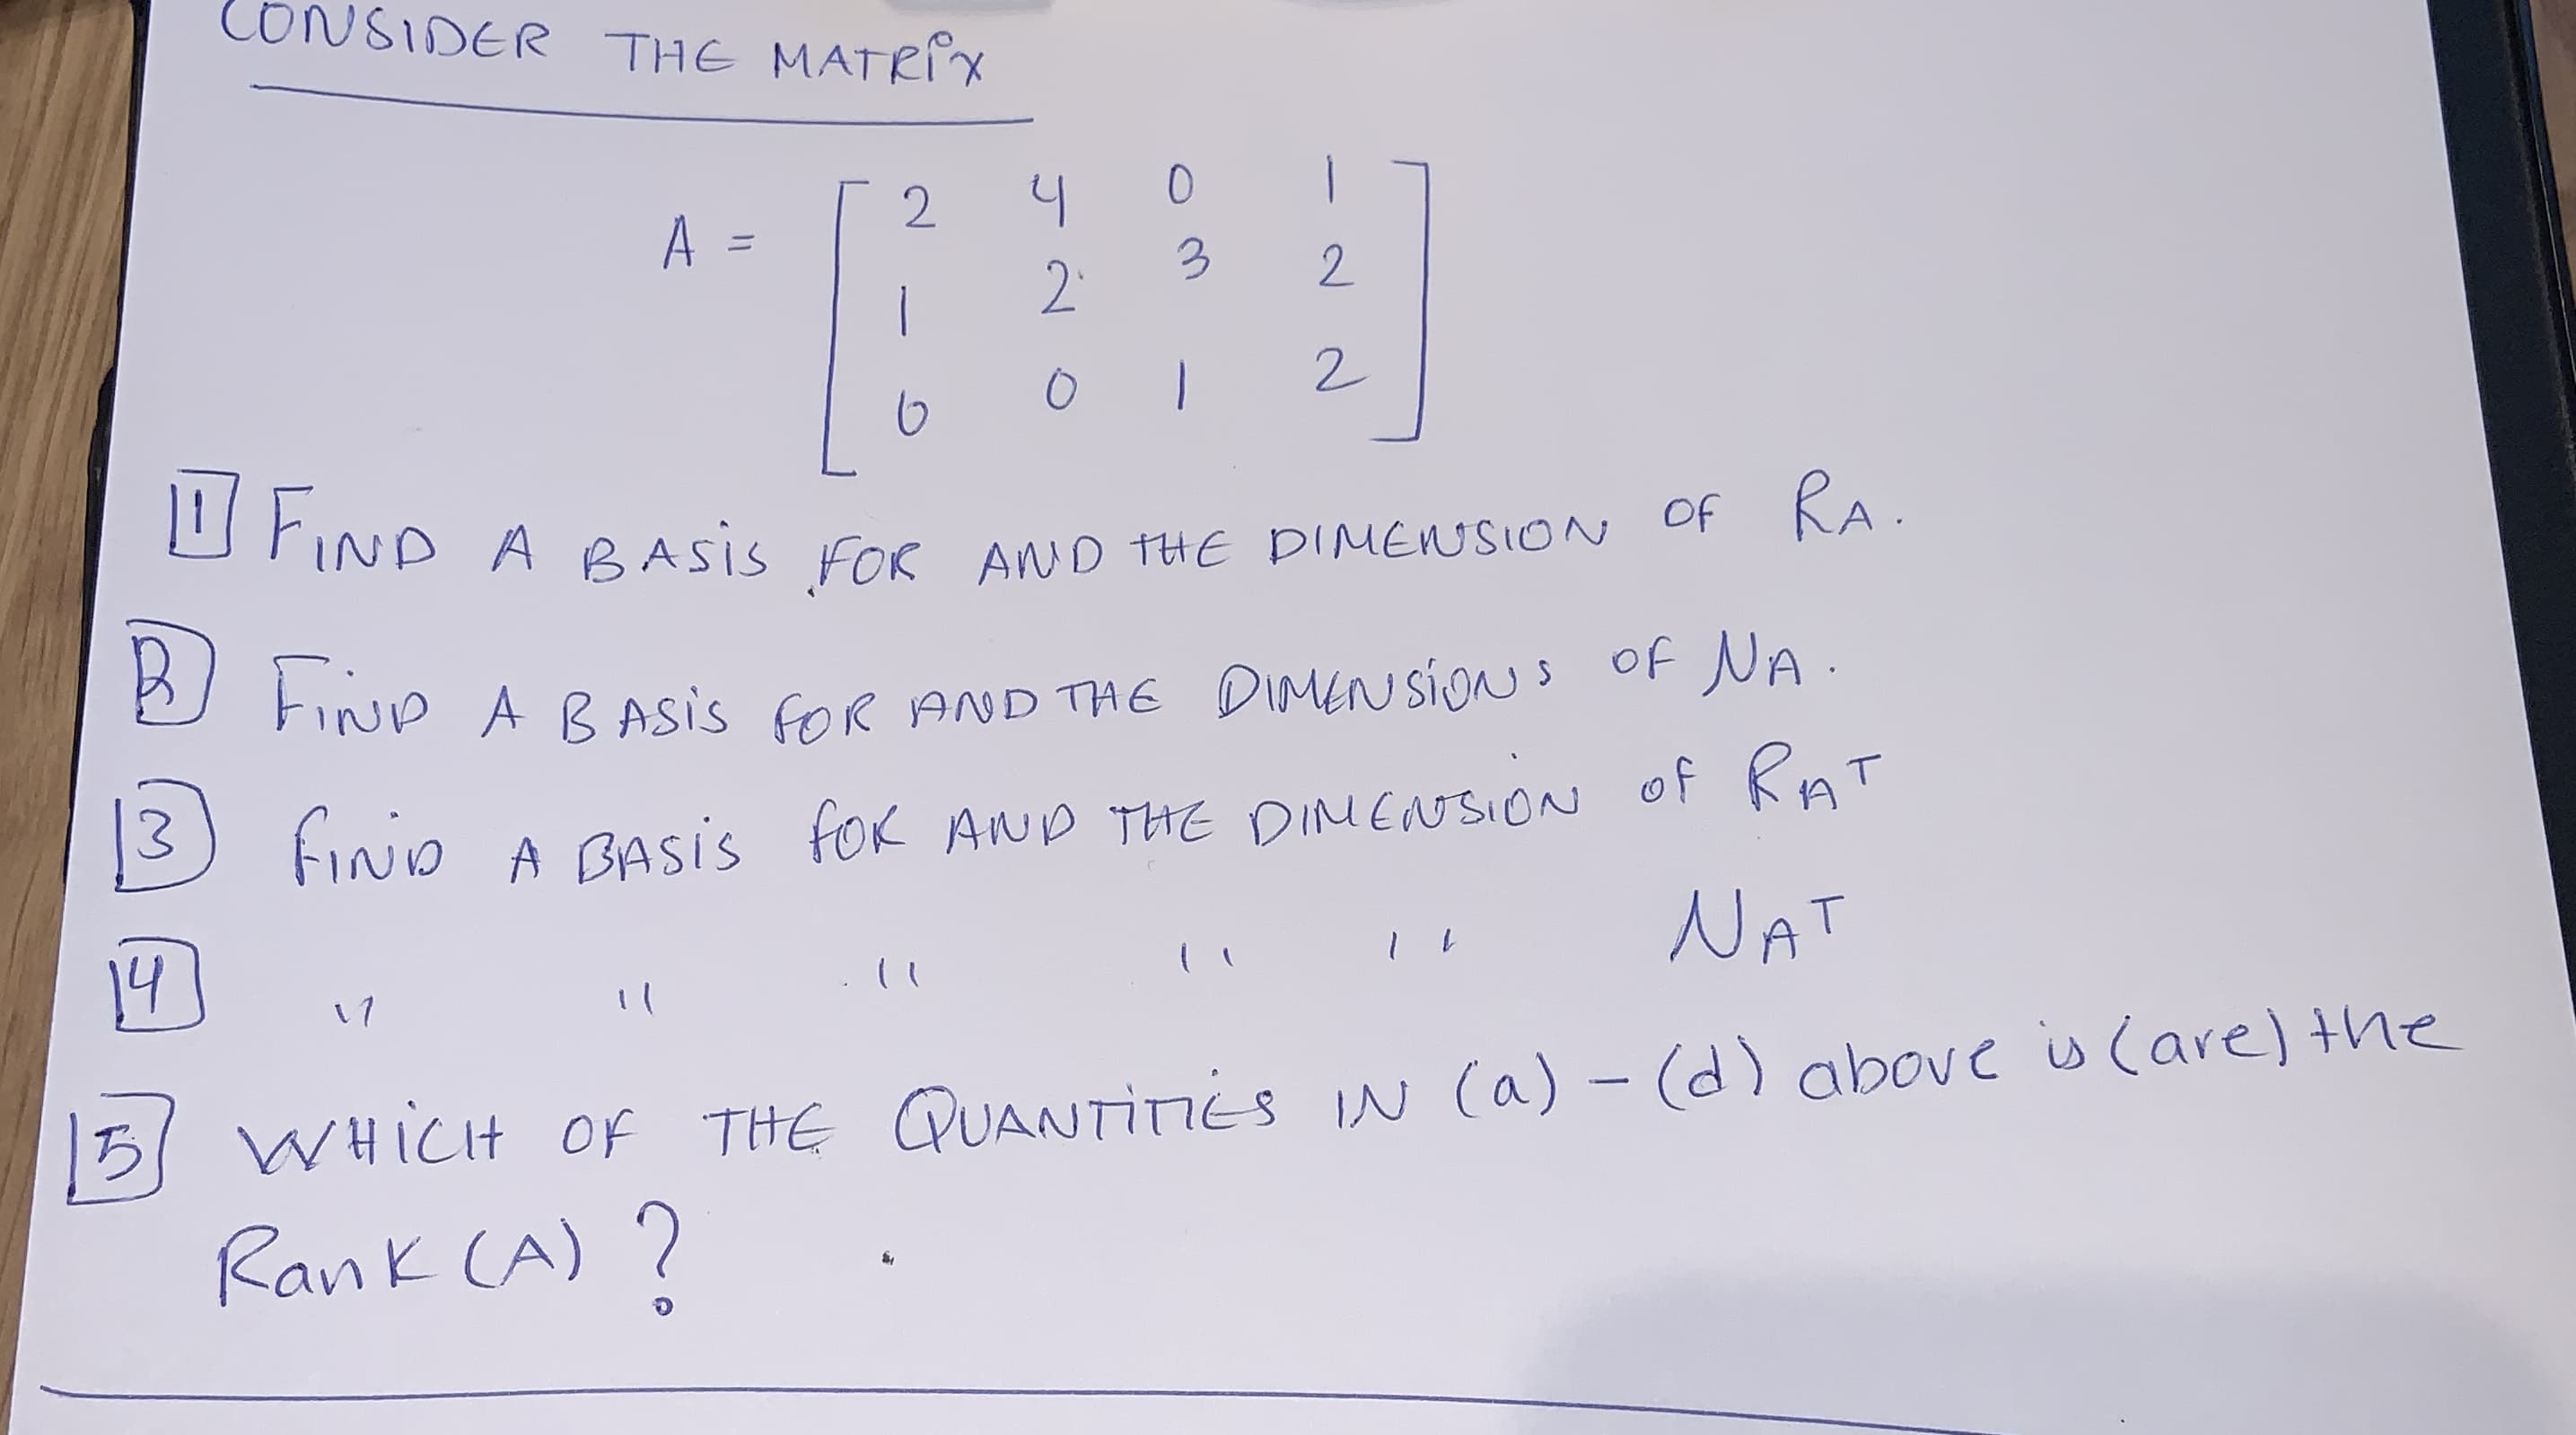 CONSIDER THE MATRIx
1
41
2
3
2
22
1IND A BASIS FOR AND THE DIMENSION OF RA
IN A BASIS fOR AND THEDIMEN SION OFNA
A BASIS fOK AND THE DINeNSION Of RnT
NAT
1 L
((
(
17
WHICH OF THE QUANTInes IN (a) - (d) abovc w (are) the
Rank CA)?
OM
11
